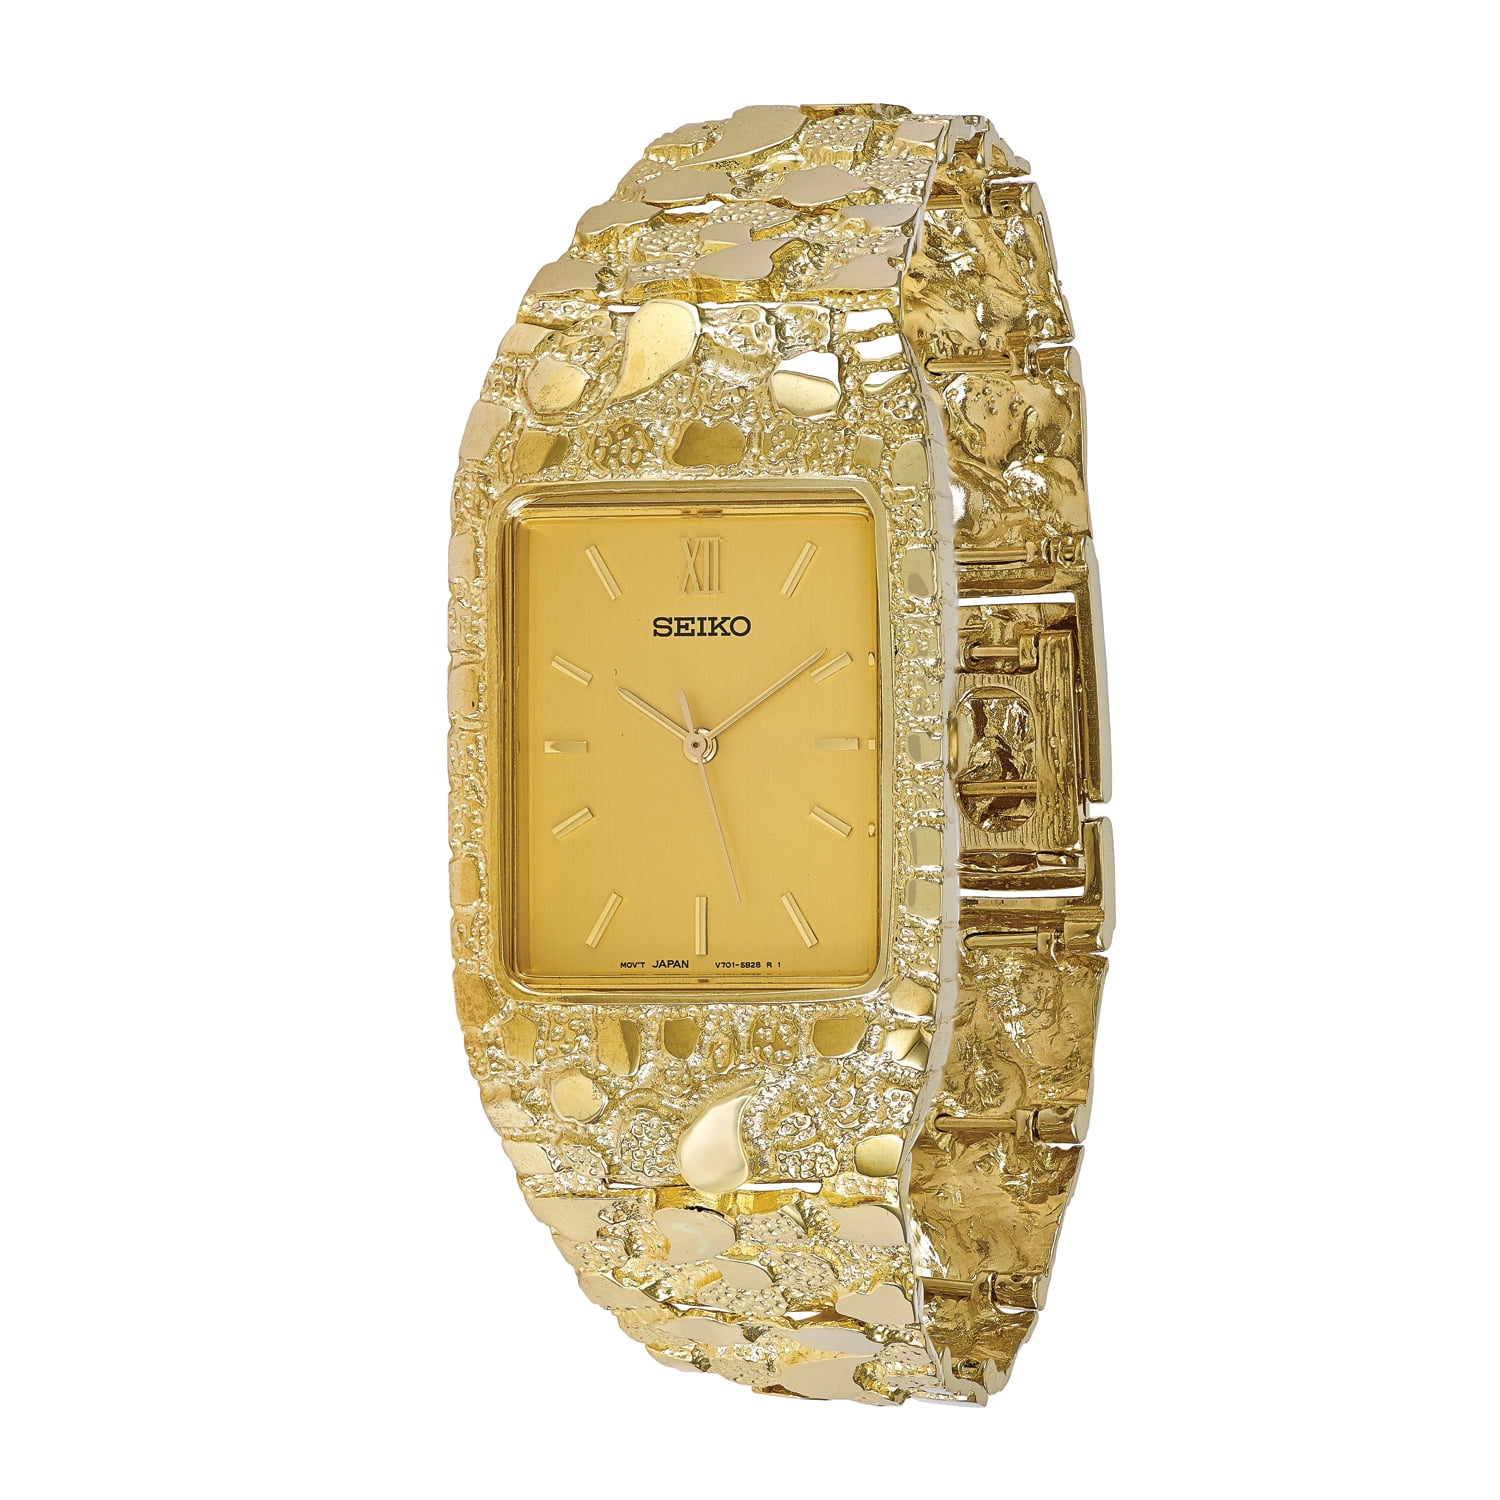 Gold 10 Karat Yellow Gold Champagne 27x47mm Dial Square Face Nugget Walmart.com